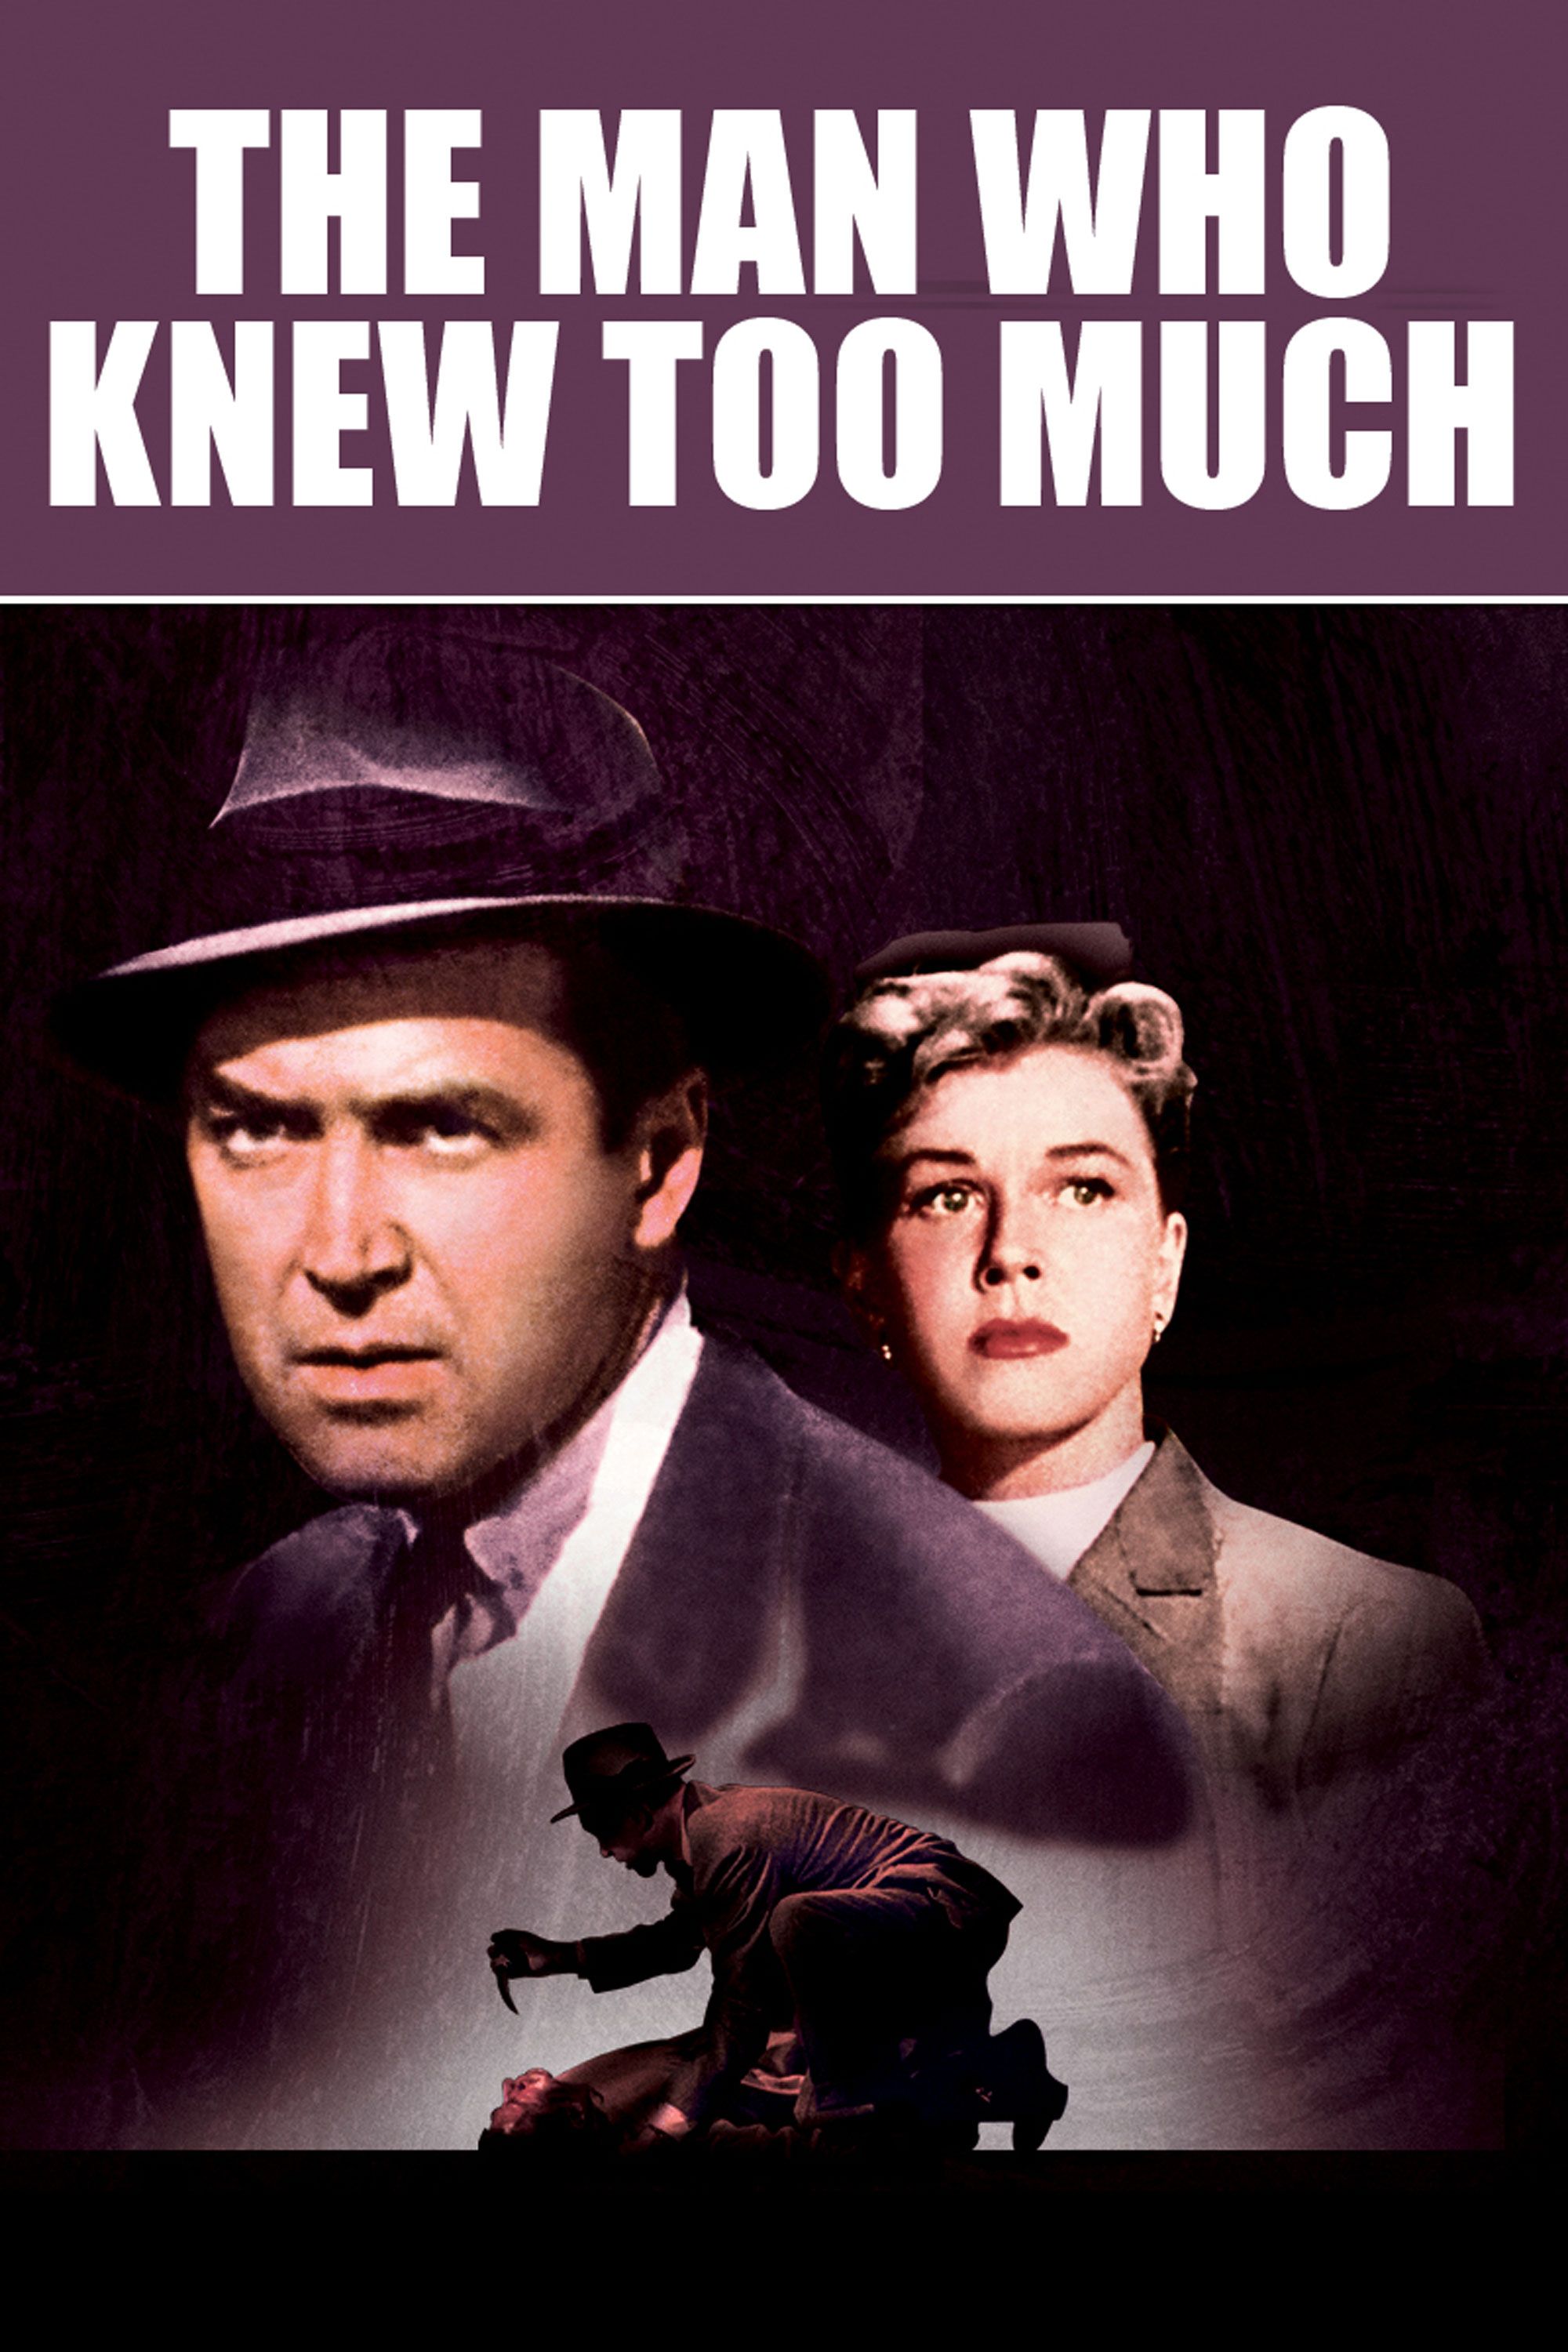 The Man Who Knew Too Much 1956 Full Movie Online In Hd Quality